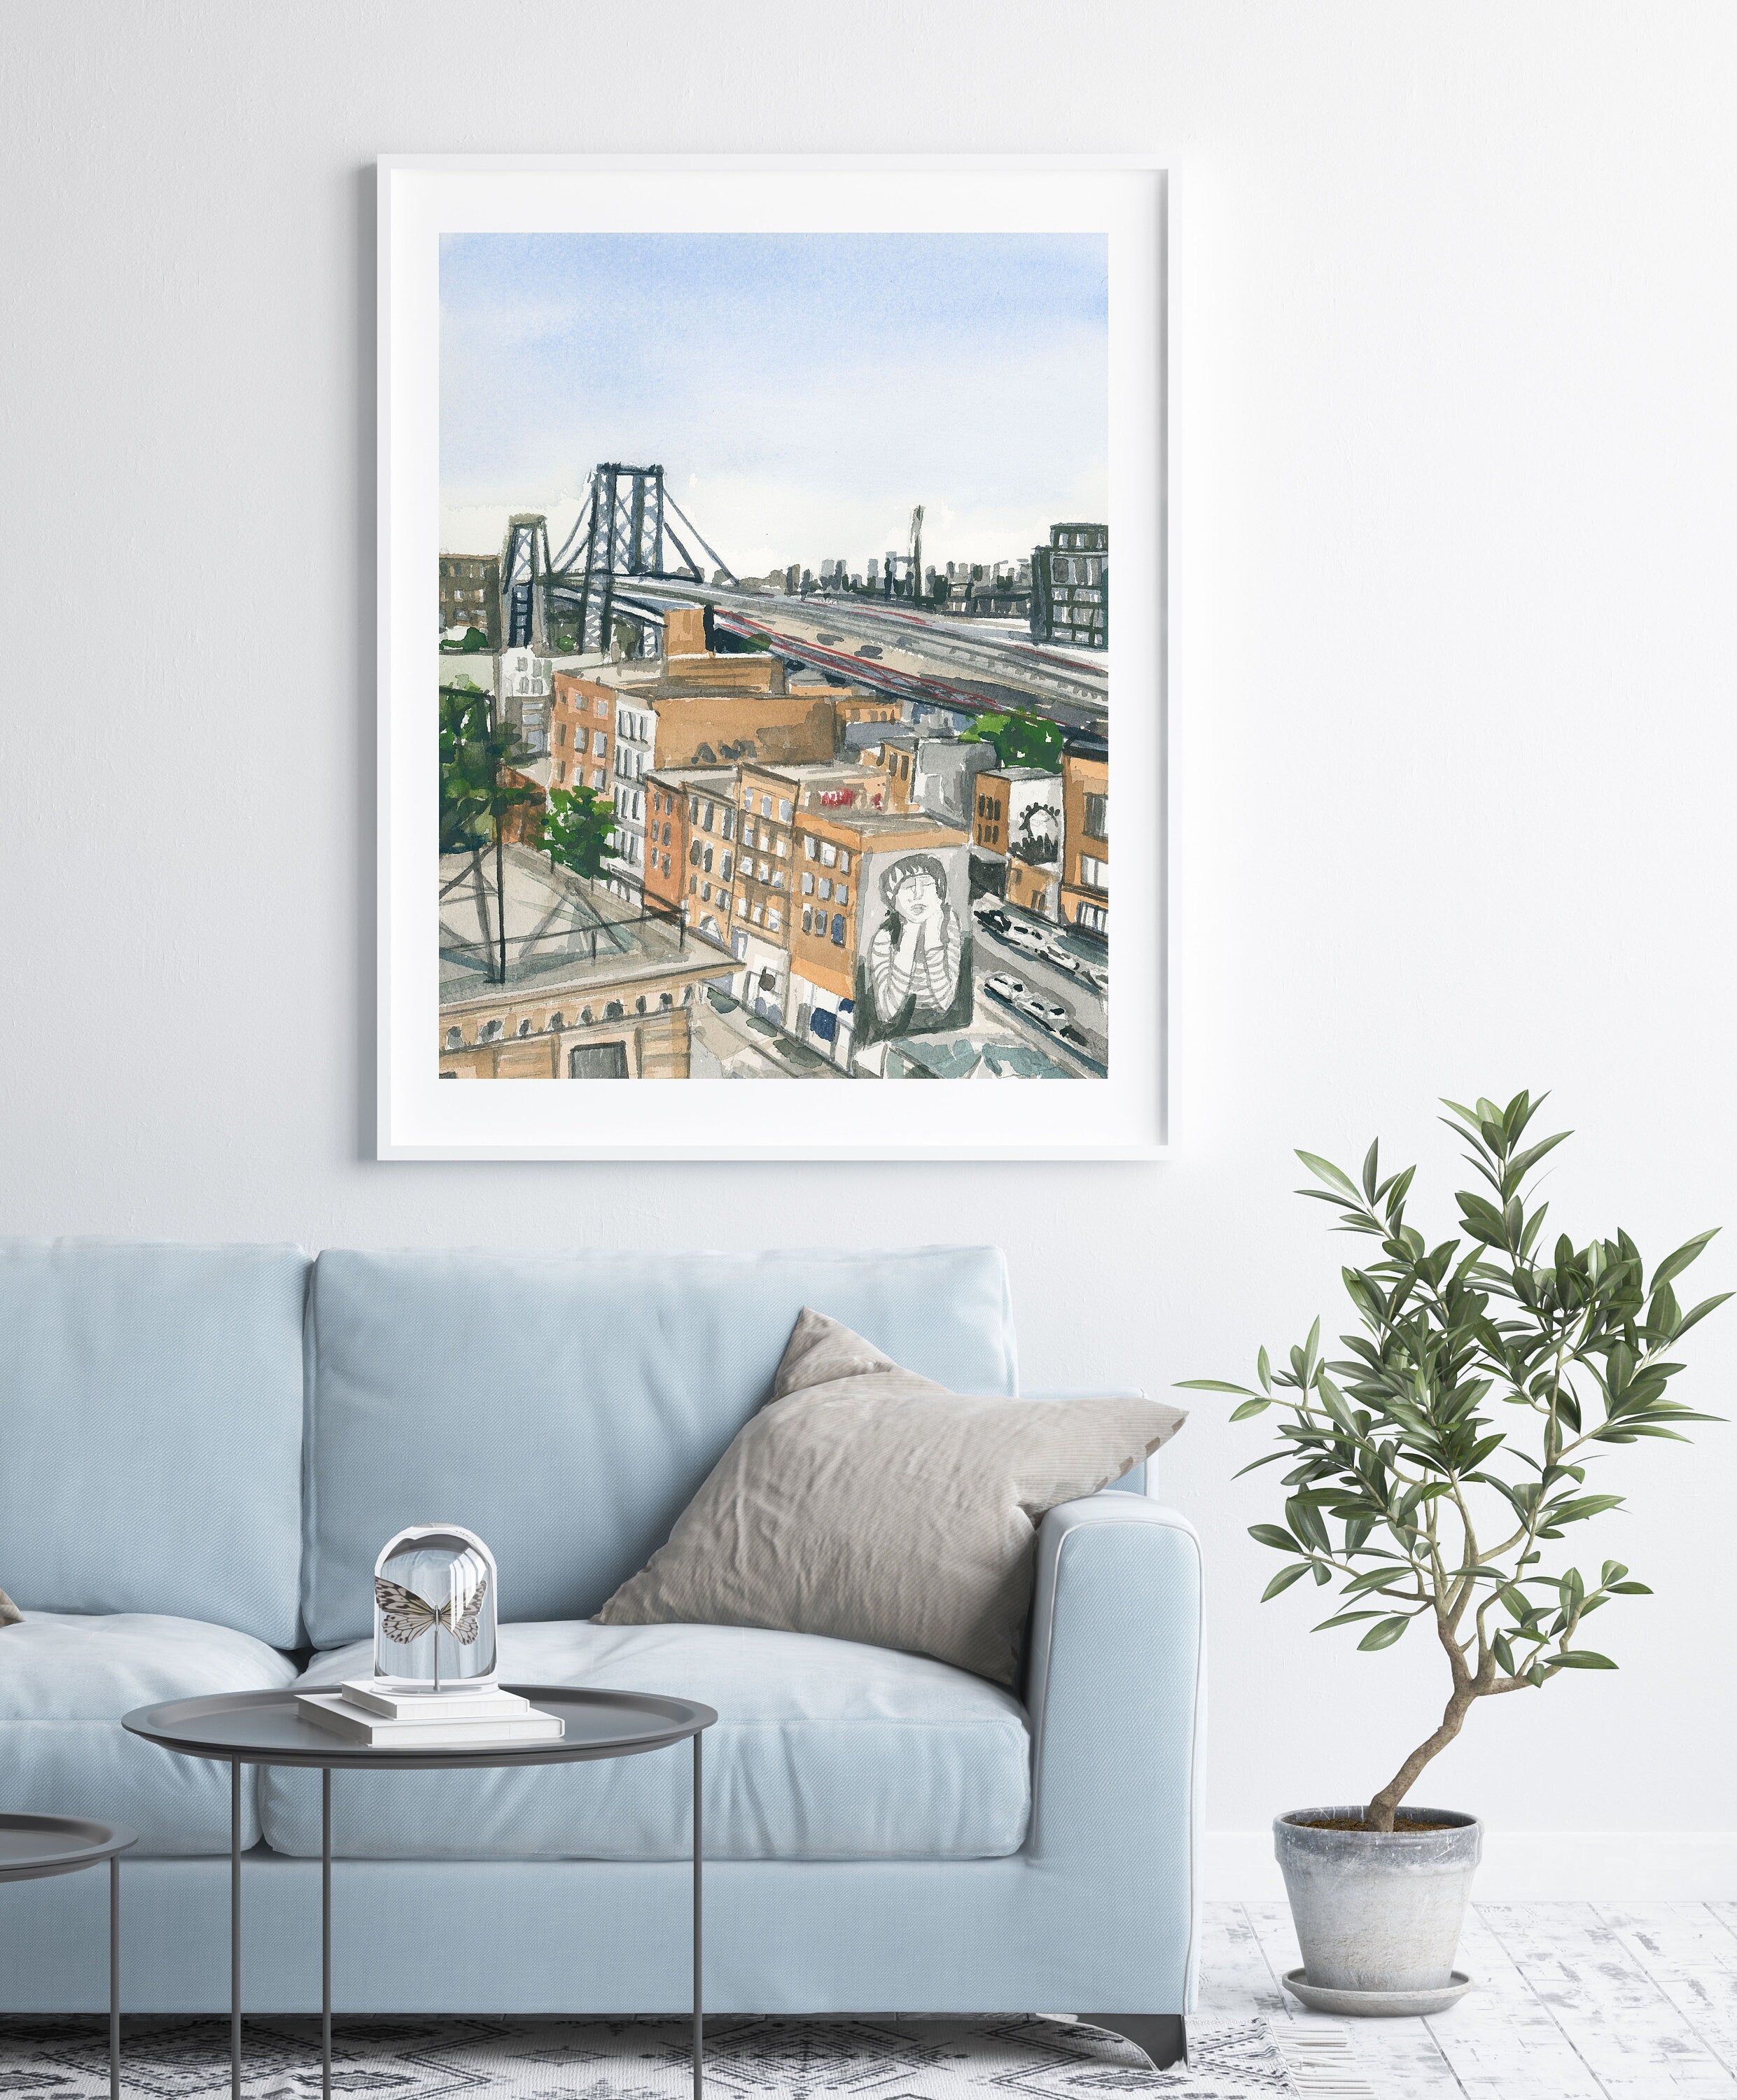 Brooklyn/Williamsburg bridge, New York streetscape print of painting by Medjool Studio. Print of original watercolor of a view of the Brooklyn Bridge from Williamsburg featuring neutral hues of a NY streetscape.